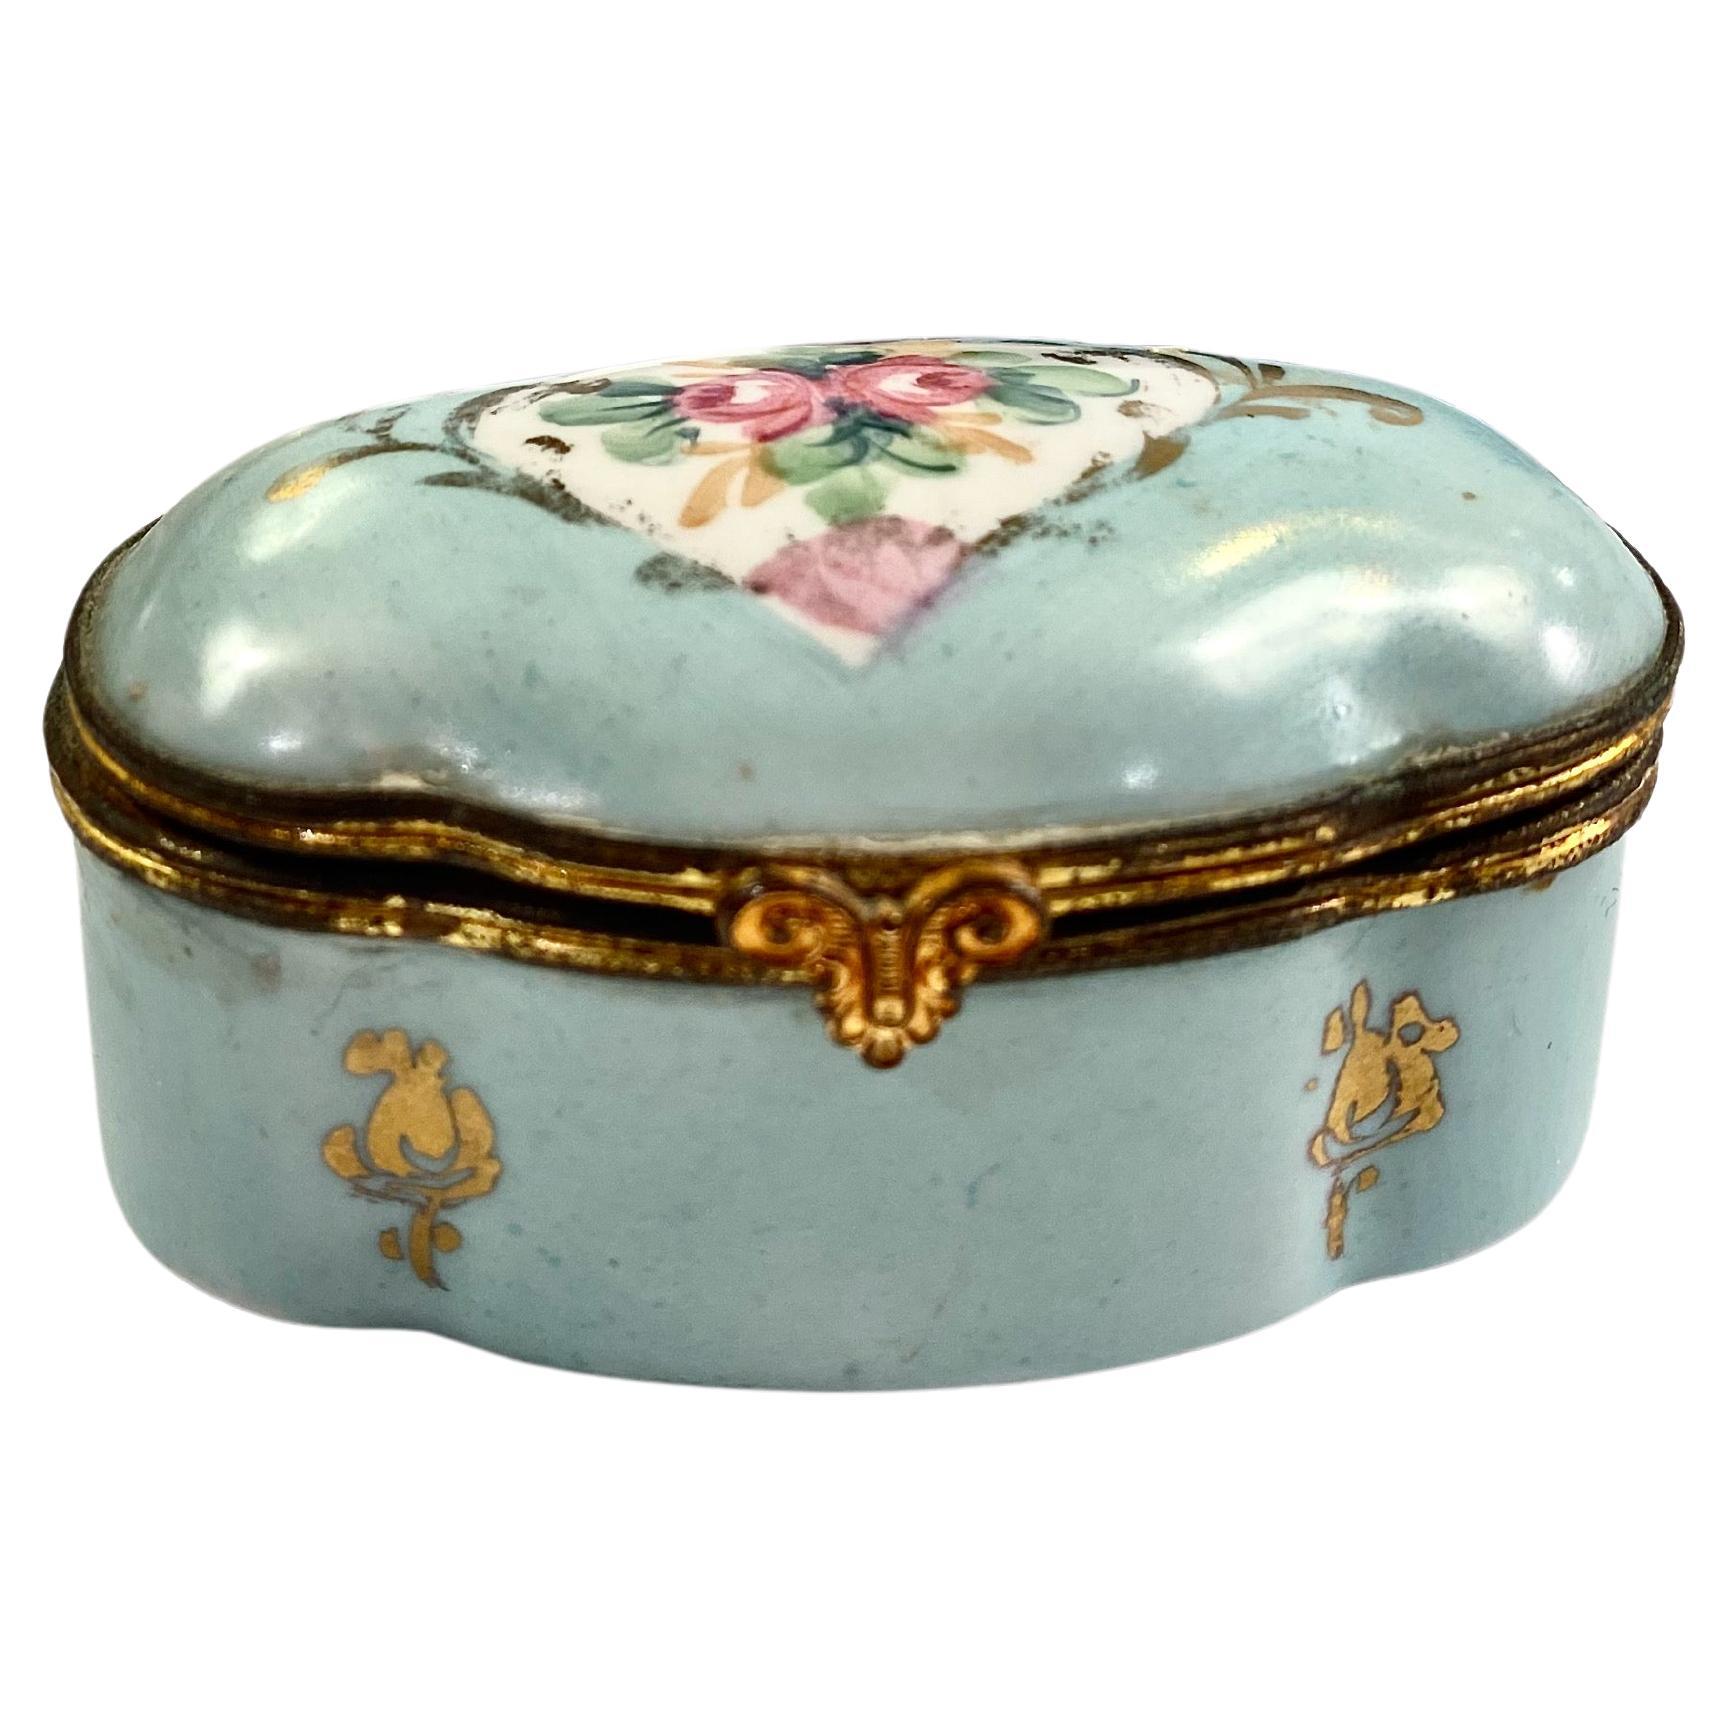 This is a charming grouping of three early 20th century dressing table boxes or table decorations. Two of the boxes are hand painted, French bronze mounted. The third box is Wedwood in the deep Portland Blue. All three boxes are in overall good